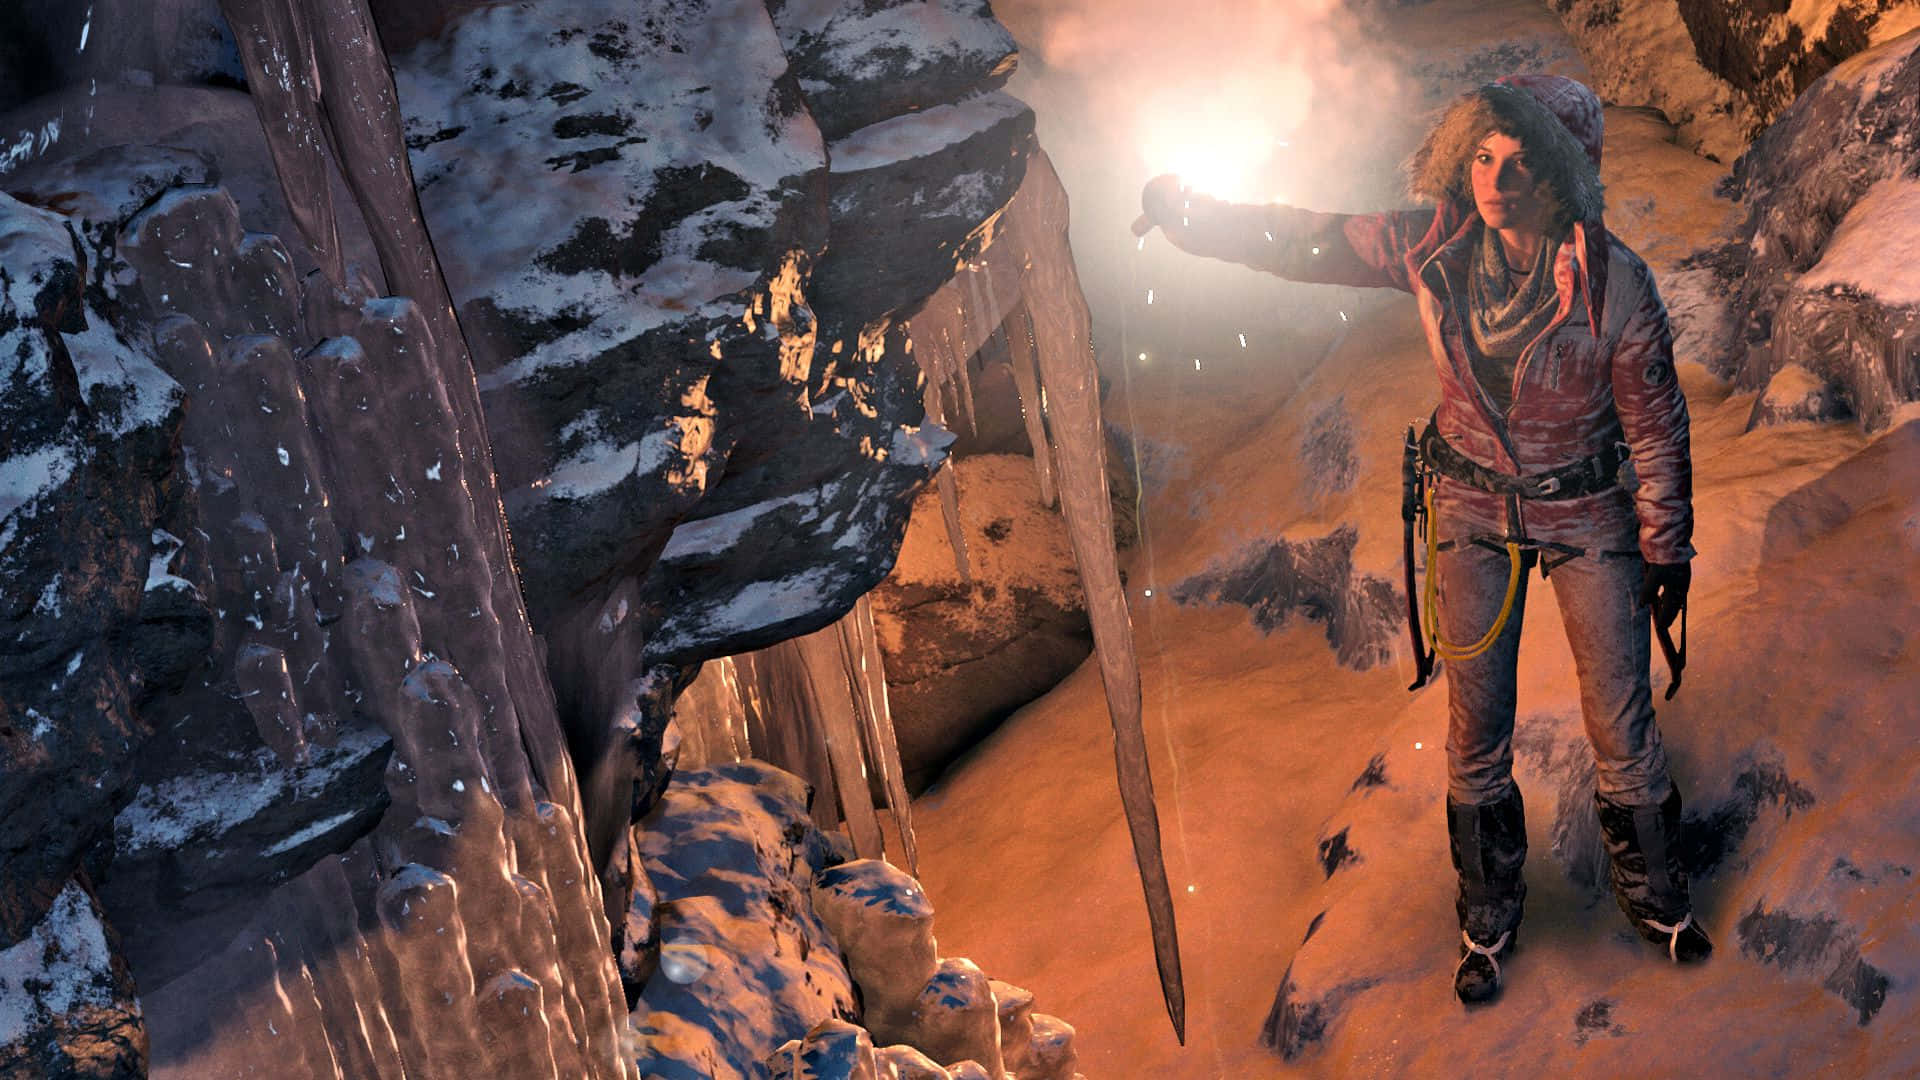 "Bravely Explore a New World in Rise Of The Tomb Raider"